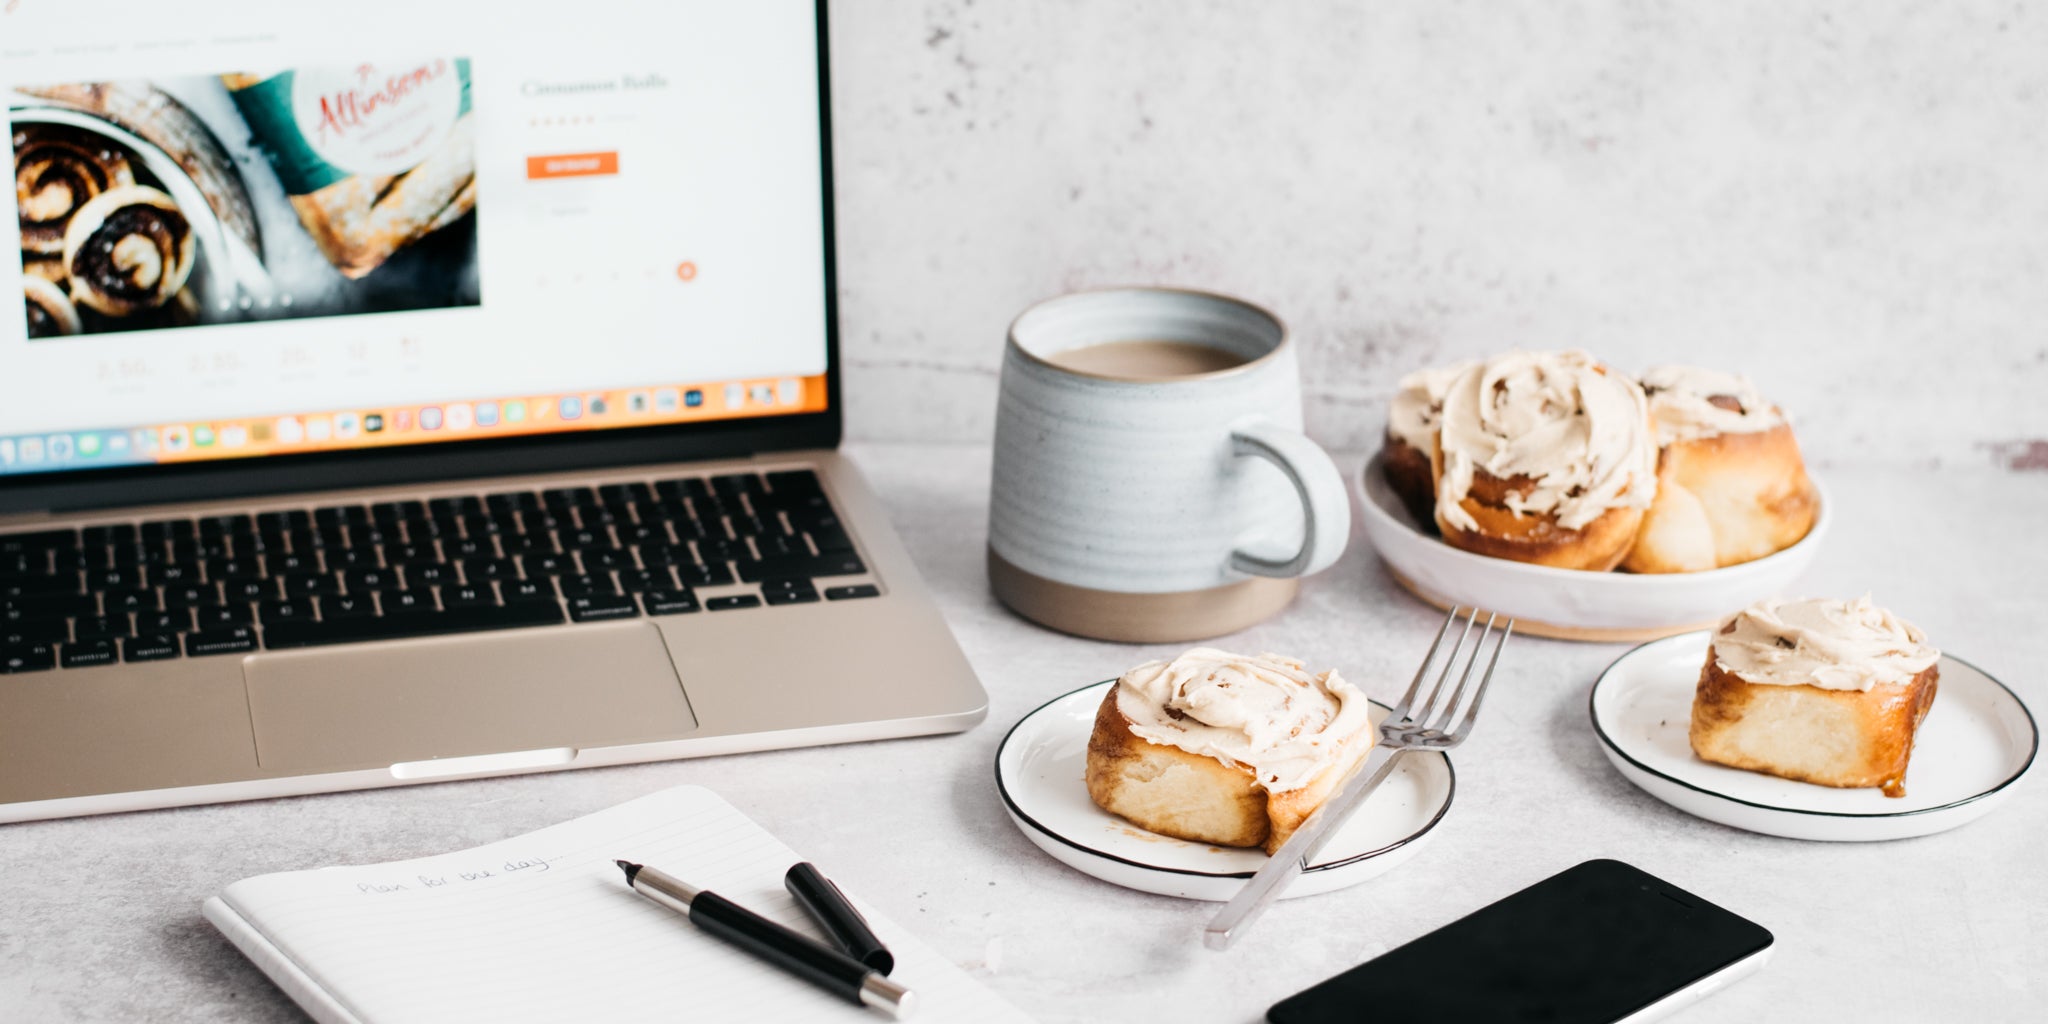 Cinnamon rolls on a plate with cup of coffee, laptop, phone and notepad